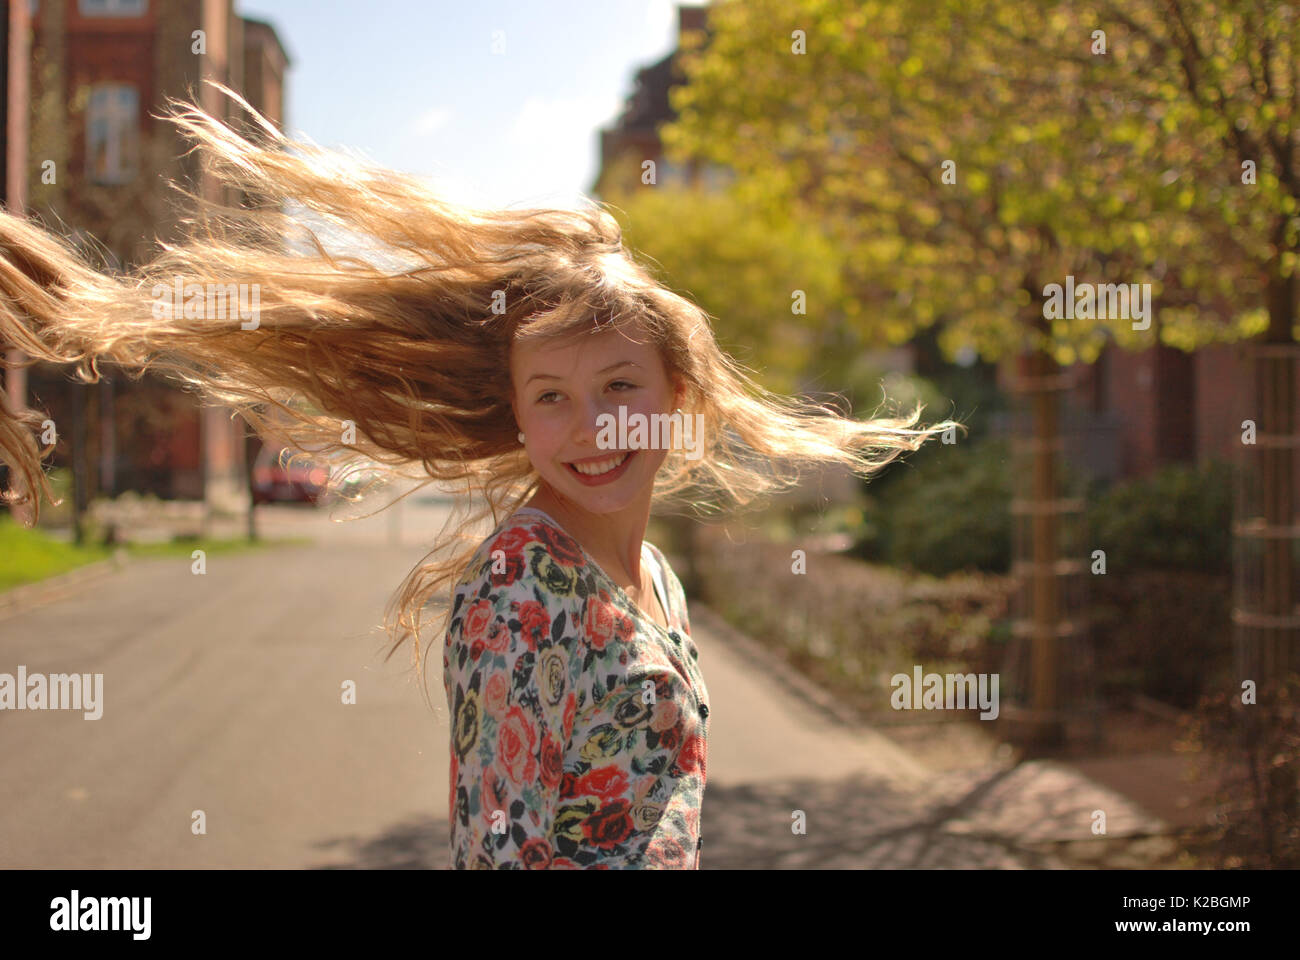 Young girl spinning round Stock Photo